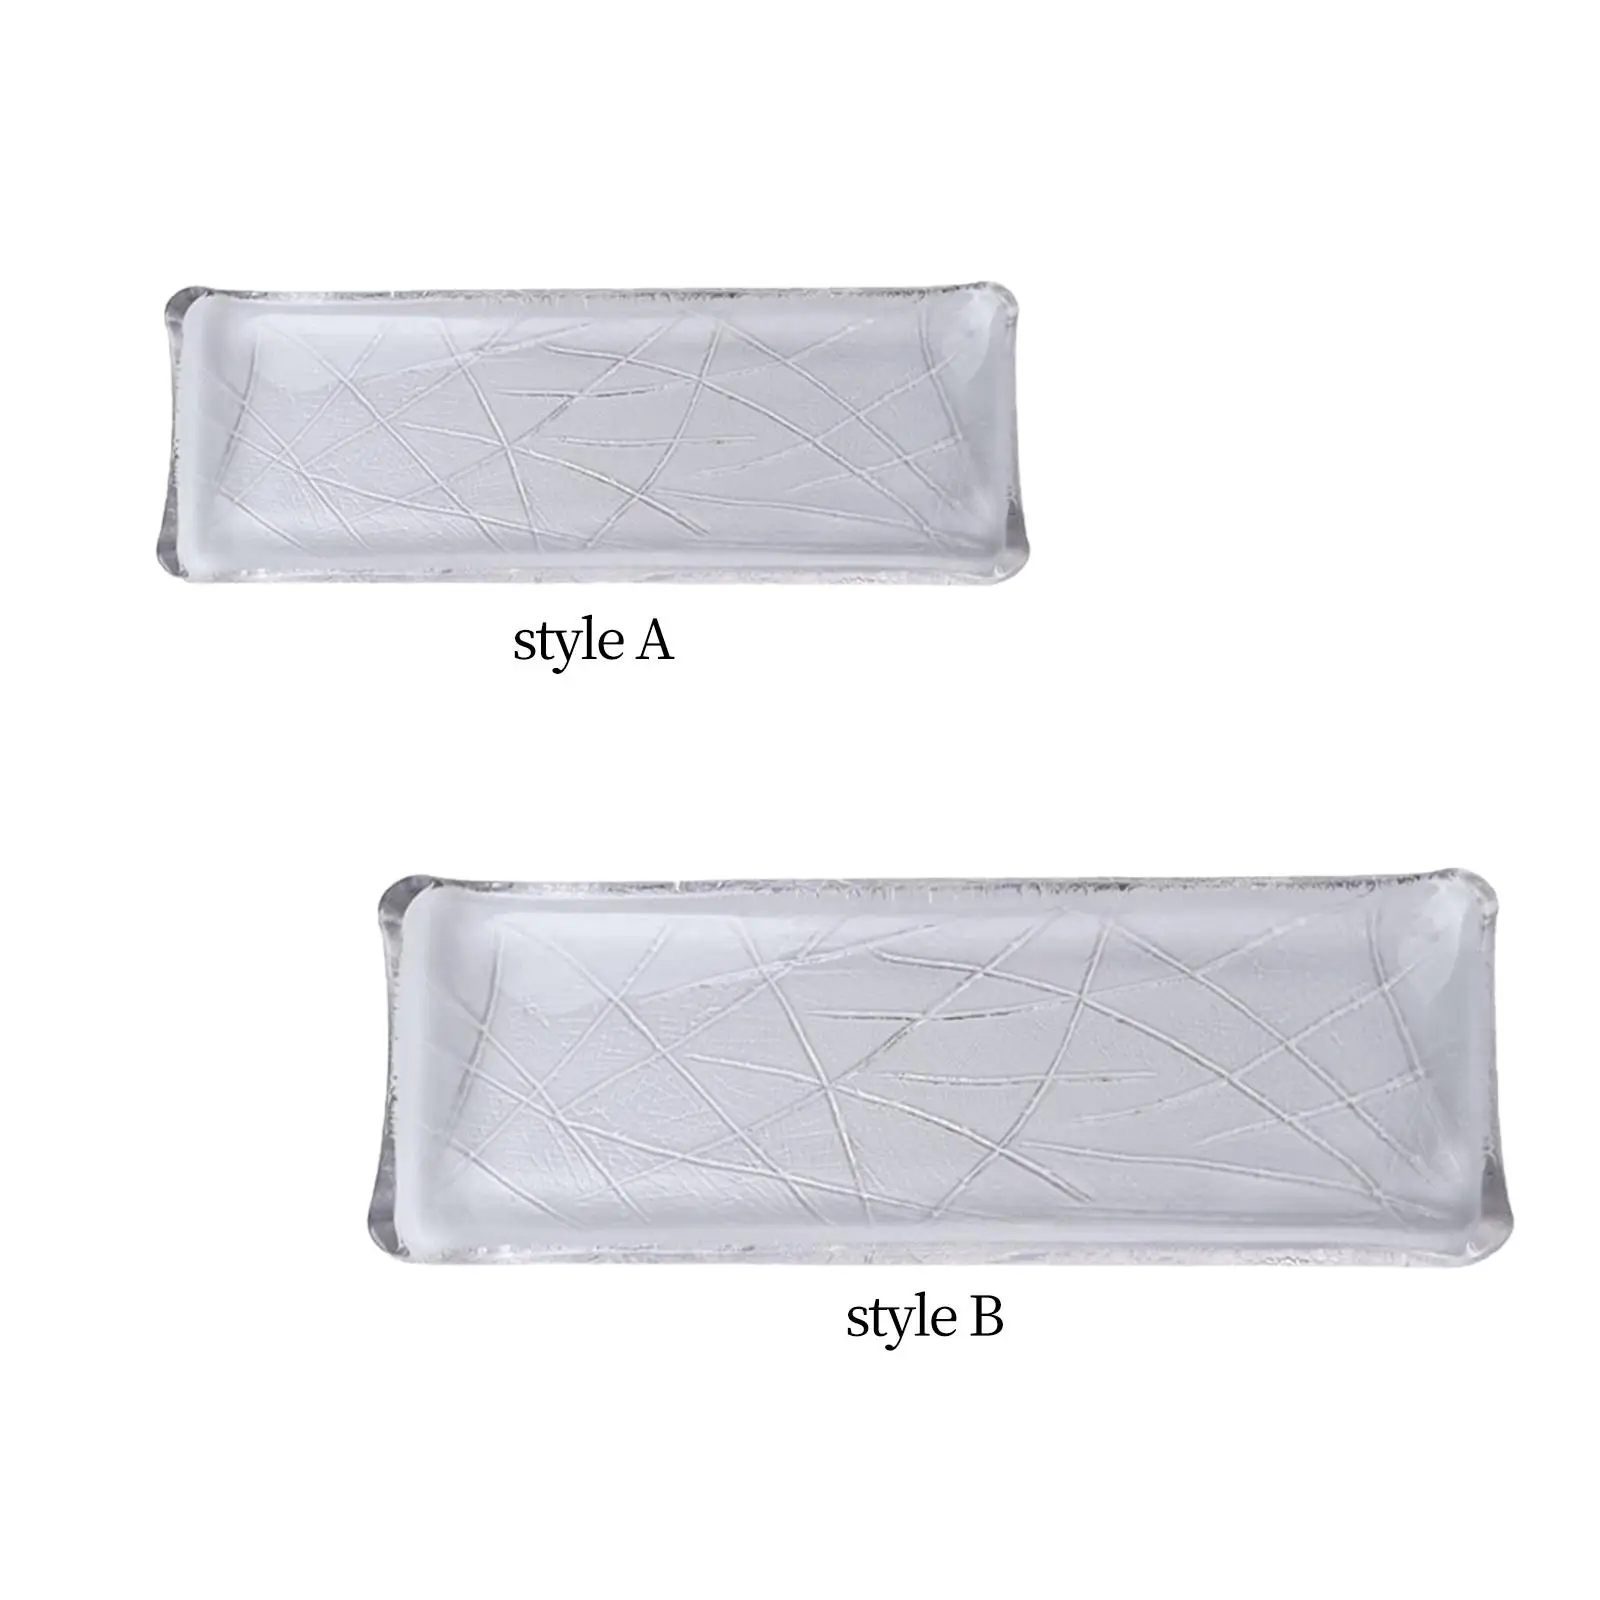 Plate tray Props Delicate Tableware Long Plate tray Dessert Plate Dinner Plate Tableware for Vegetable Salad Bread Fish